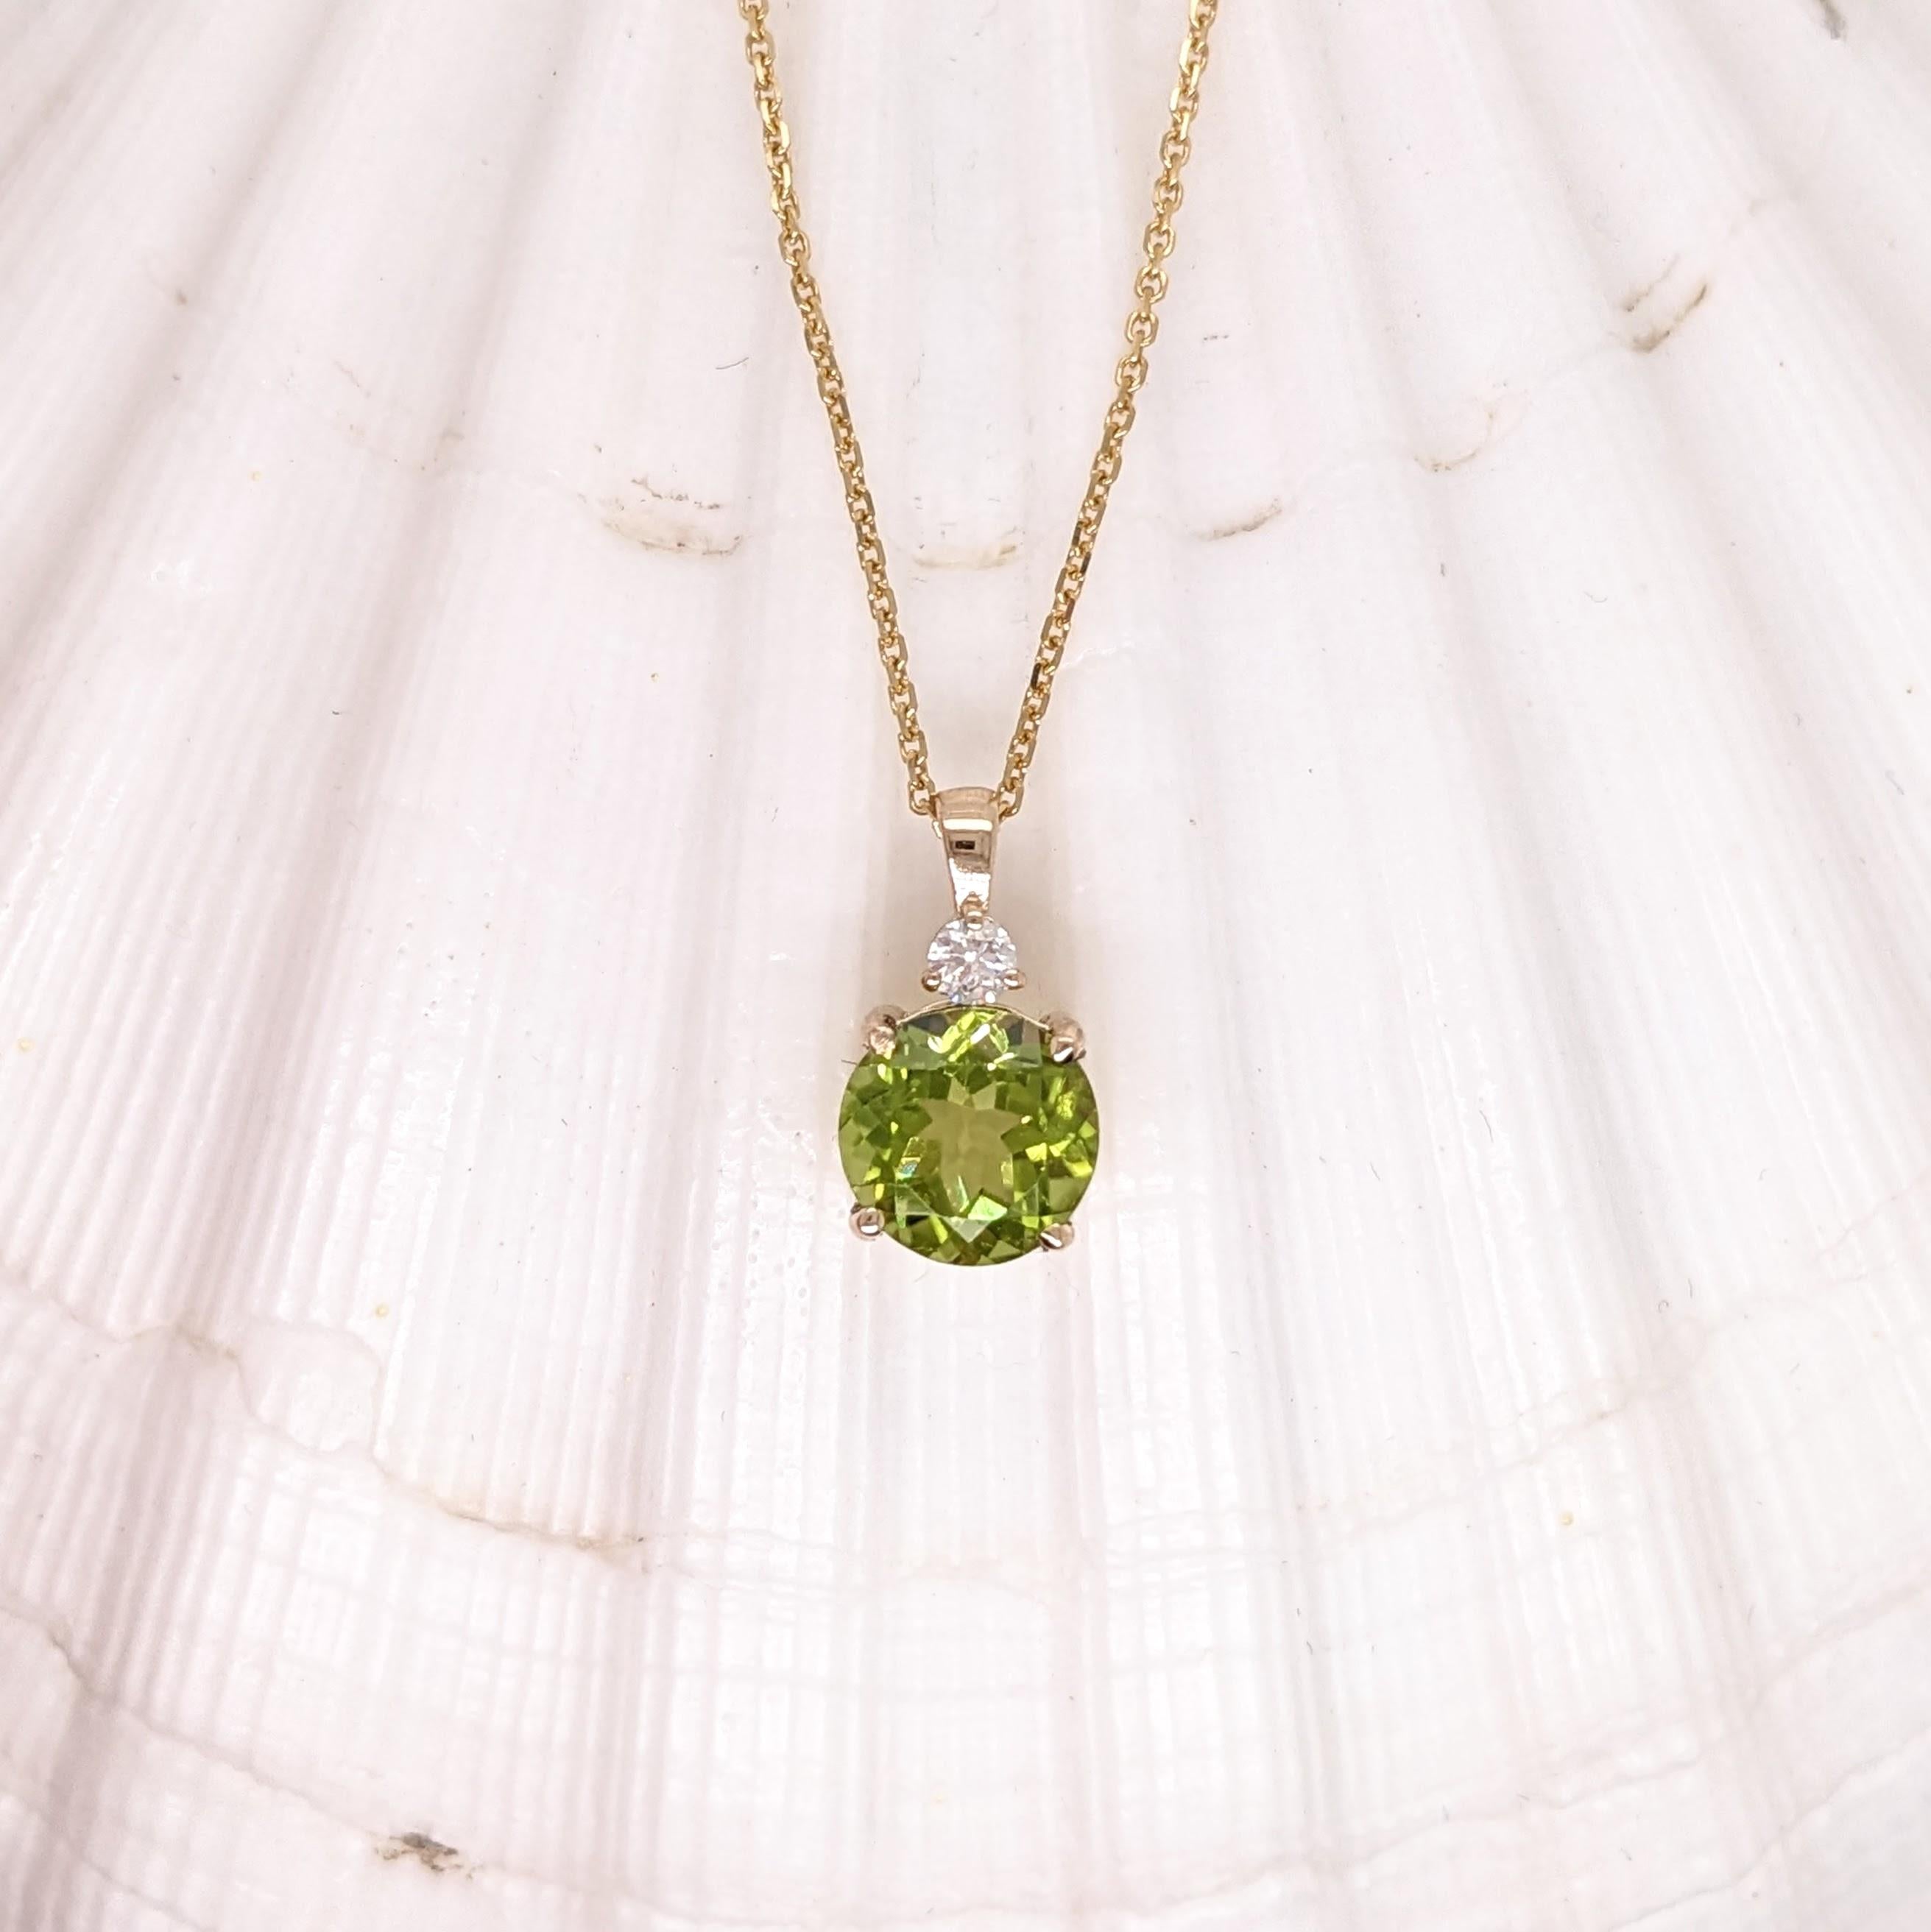 2ct Peridot Pendant with Natural Diamond in 14K Solid Yellow Gold